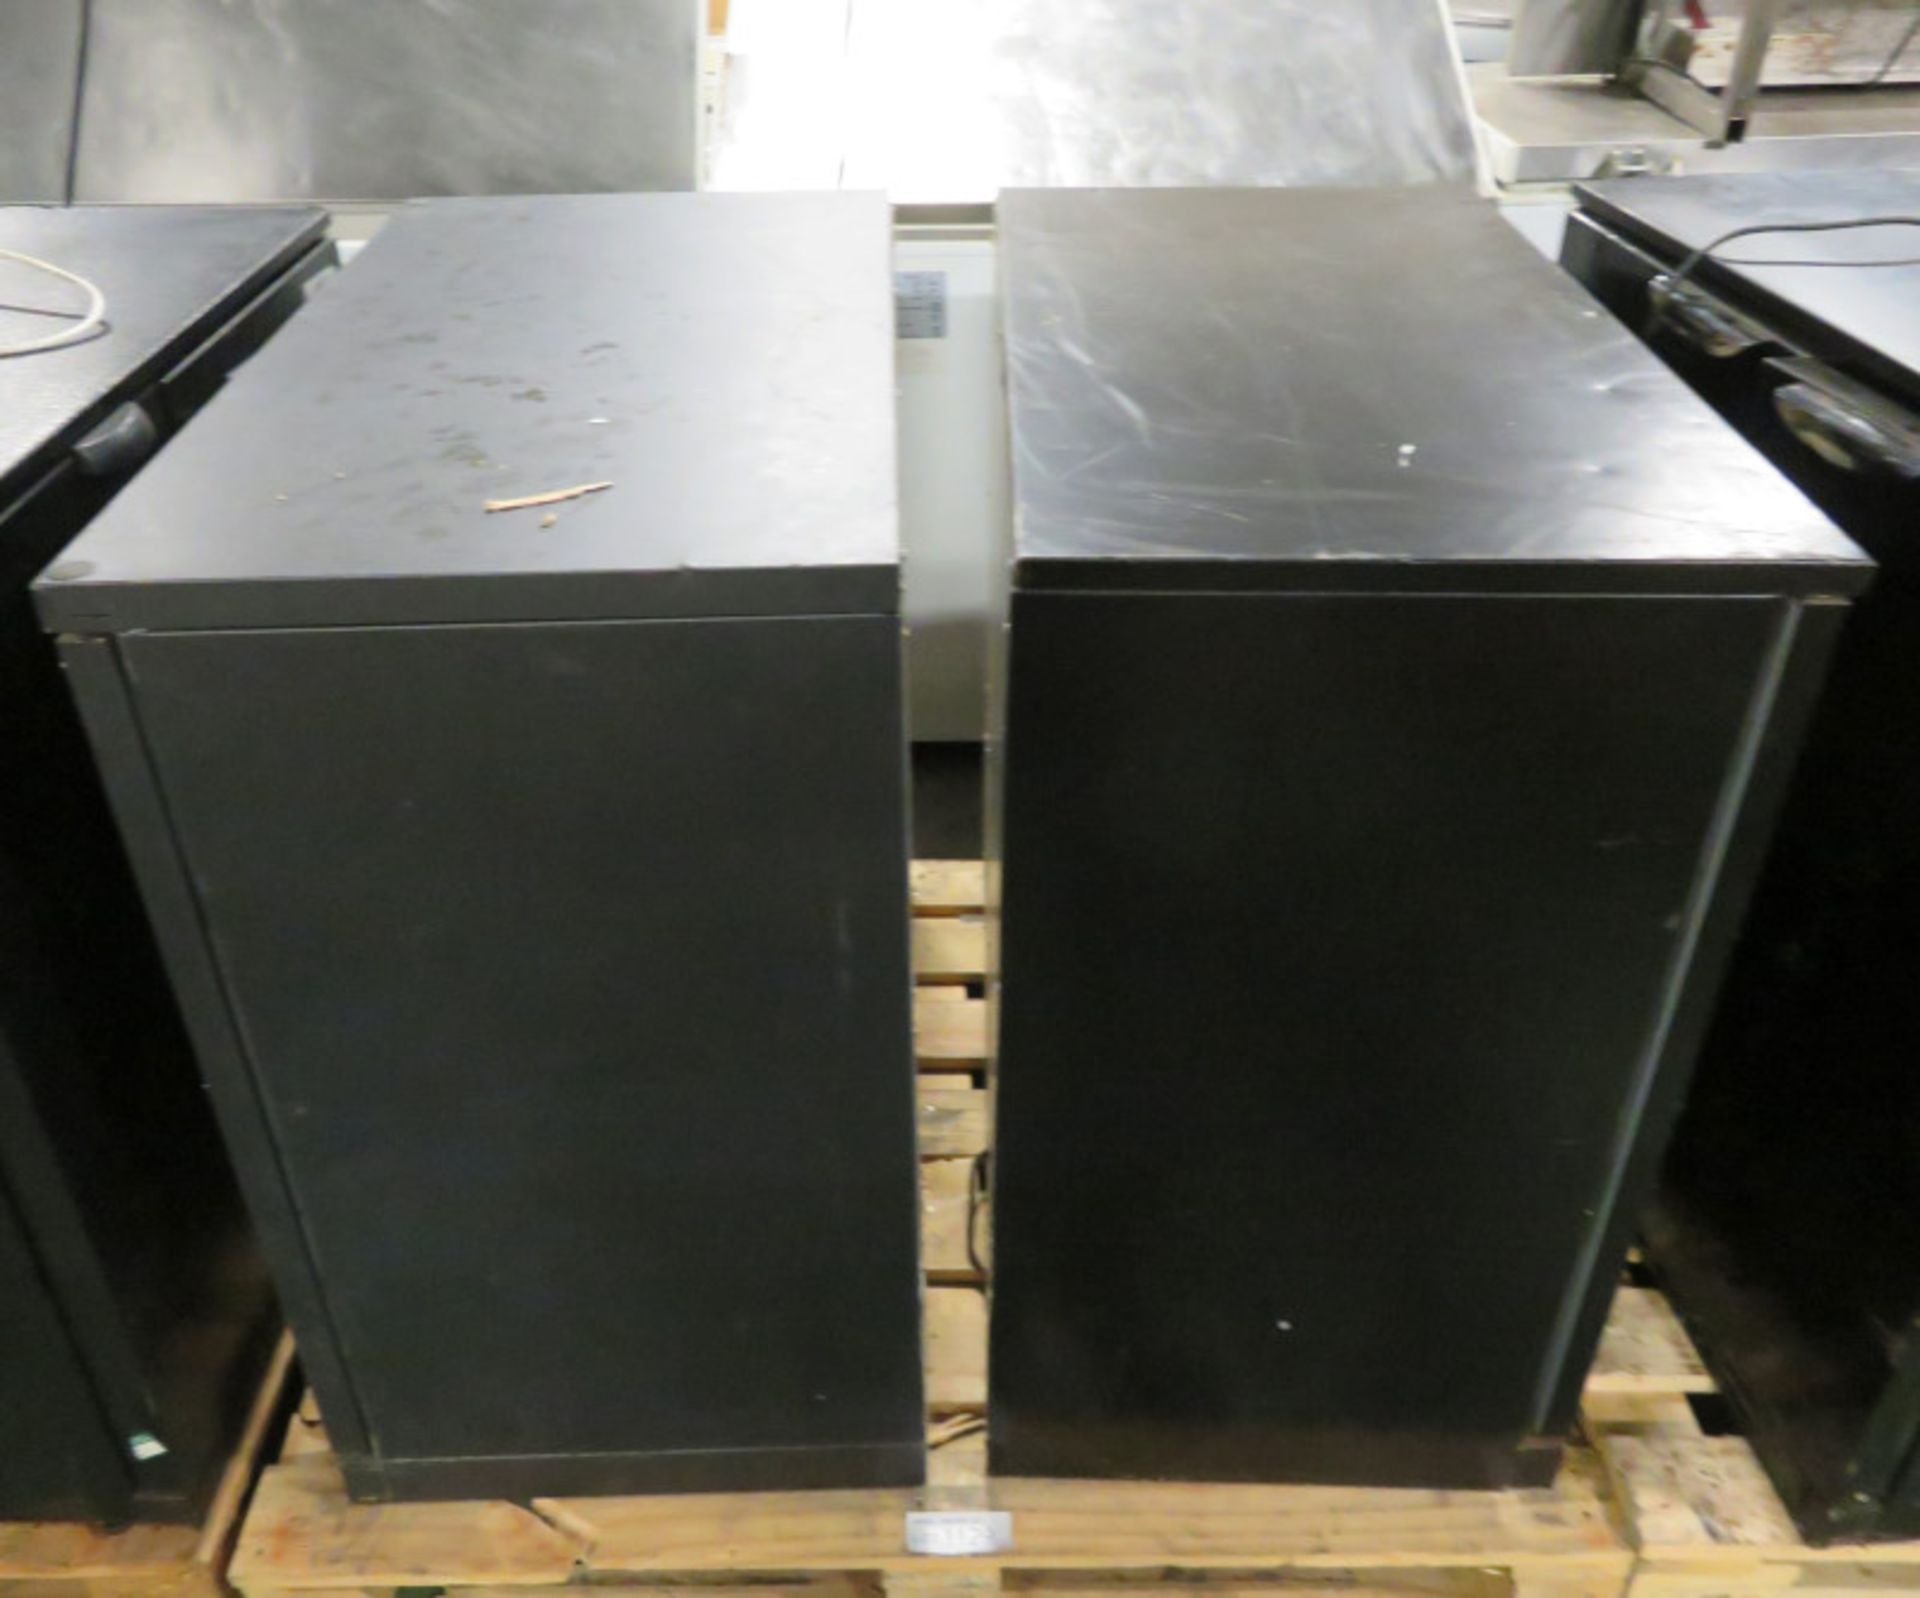 2x Undercounter Chillers - As spares